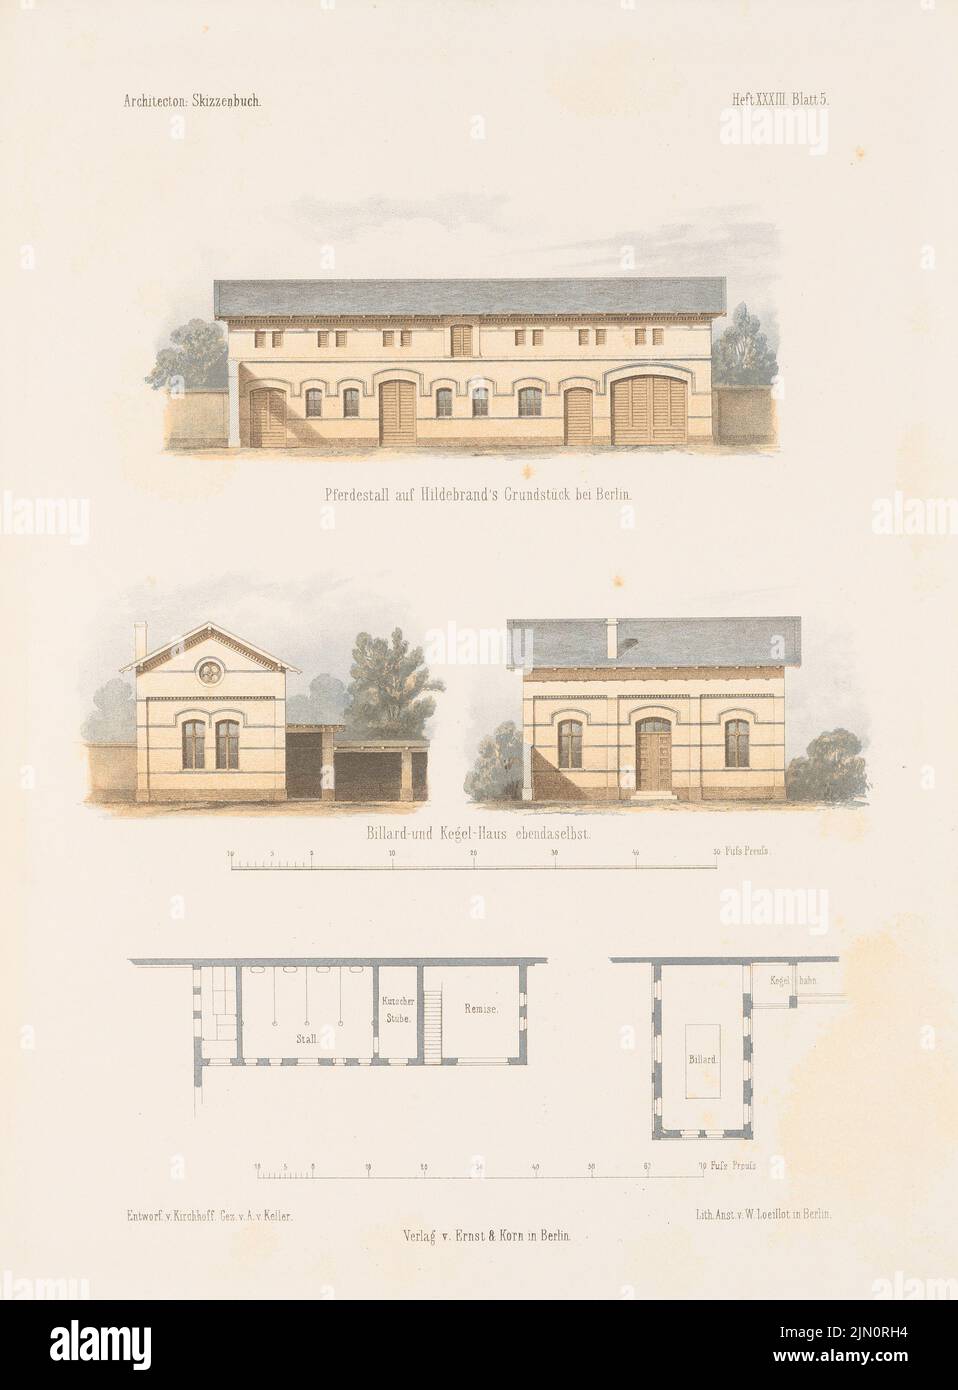 Kirchhoff Wilhelm (1861-1888), horse stable on Hildebrandt's property, Schönhausen. Billard and bowling house on Hildebrandt's property, Schönhausen. (From: Architectural sketches (1857-1857): floor plan, view stable, floor plan, view, side view of bowling track. Lithography colored on paper, 66.2 x 48.8 cm (incl. Scan edges) Kirchhoff Wilhelm  (1861-1888): Pferdestall auf Hildebrandts Grundstück, Berlin. Billard- und Kegelhaus auf Hildebrandts Grundstück, Berlin. (Aus: Architektonisches Skizzenbuch, H. 33, 1857) Stock Photo